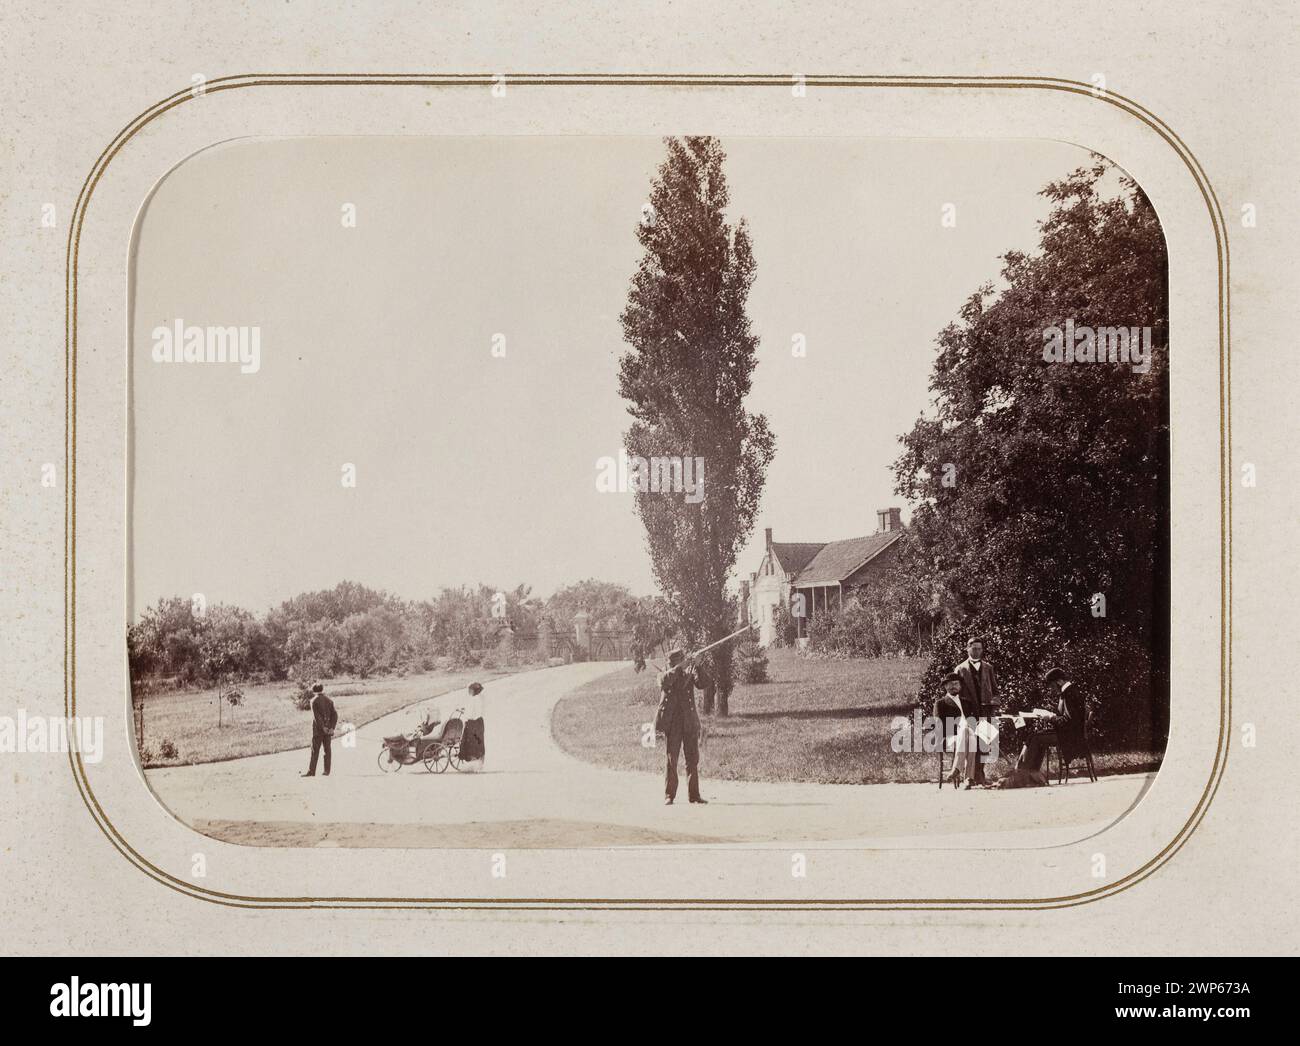 Soko Towel 1870 '. In the park. Kolodionowy; Products with W Lawn / paper / photo paper / albumin paper, products from W Dzkien / Paper / Carton; Photographic Print: height 11.8 cm, width 17.2 cm, pod ADKA: height 12.8 cm, width 18.6 cm; di 131457/7 MNW; all rights reserved.Brzozowski (family), Przewłocki, Janusz (1927-2007) - collection, Sokołówka, court Stock Photo